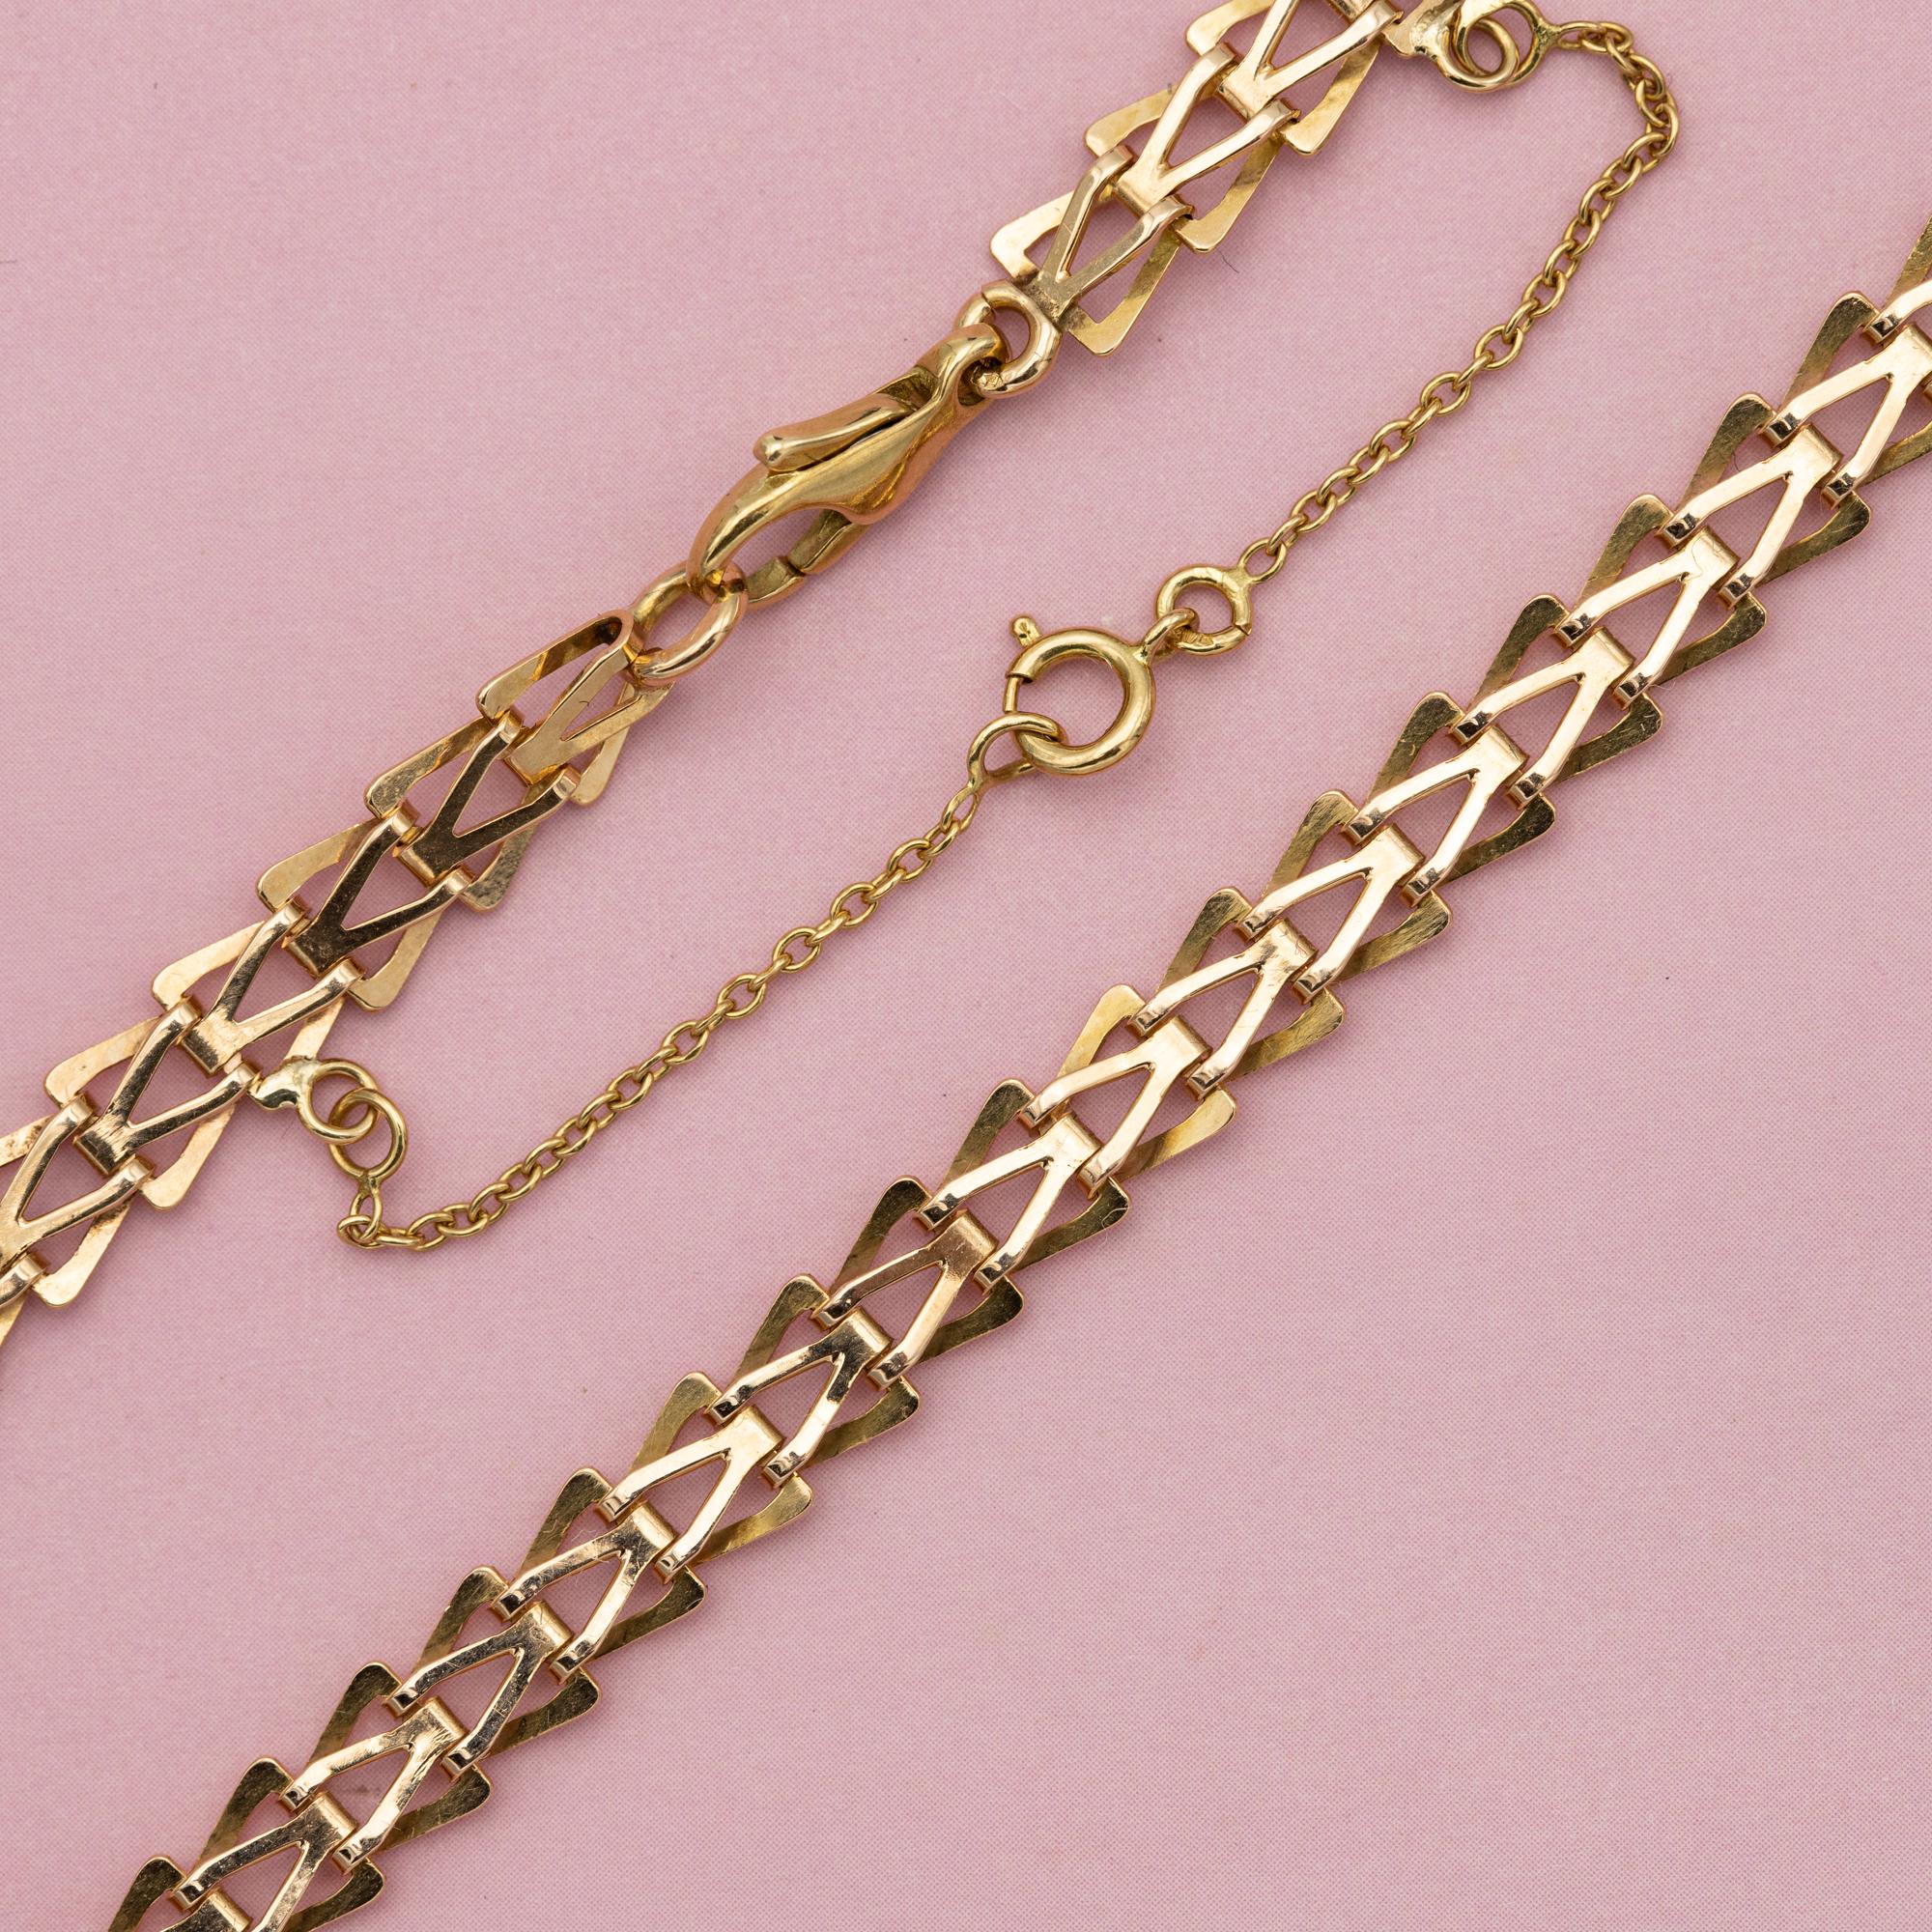 18k solid gold Retro chain - French triangles necklace - 44.5 cm - 17.5 inch 1